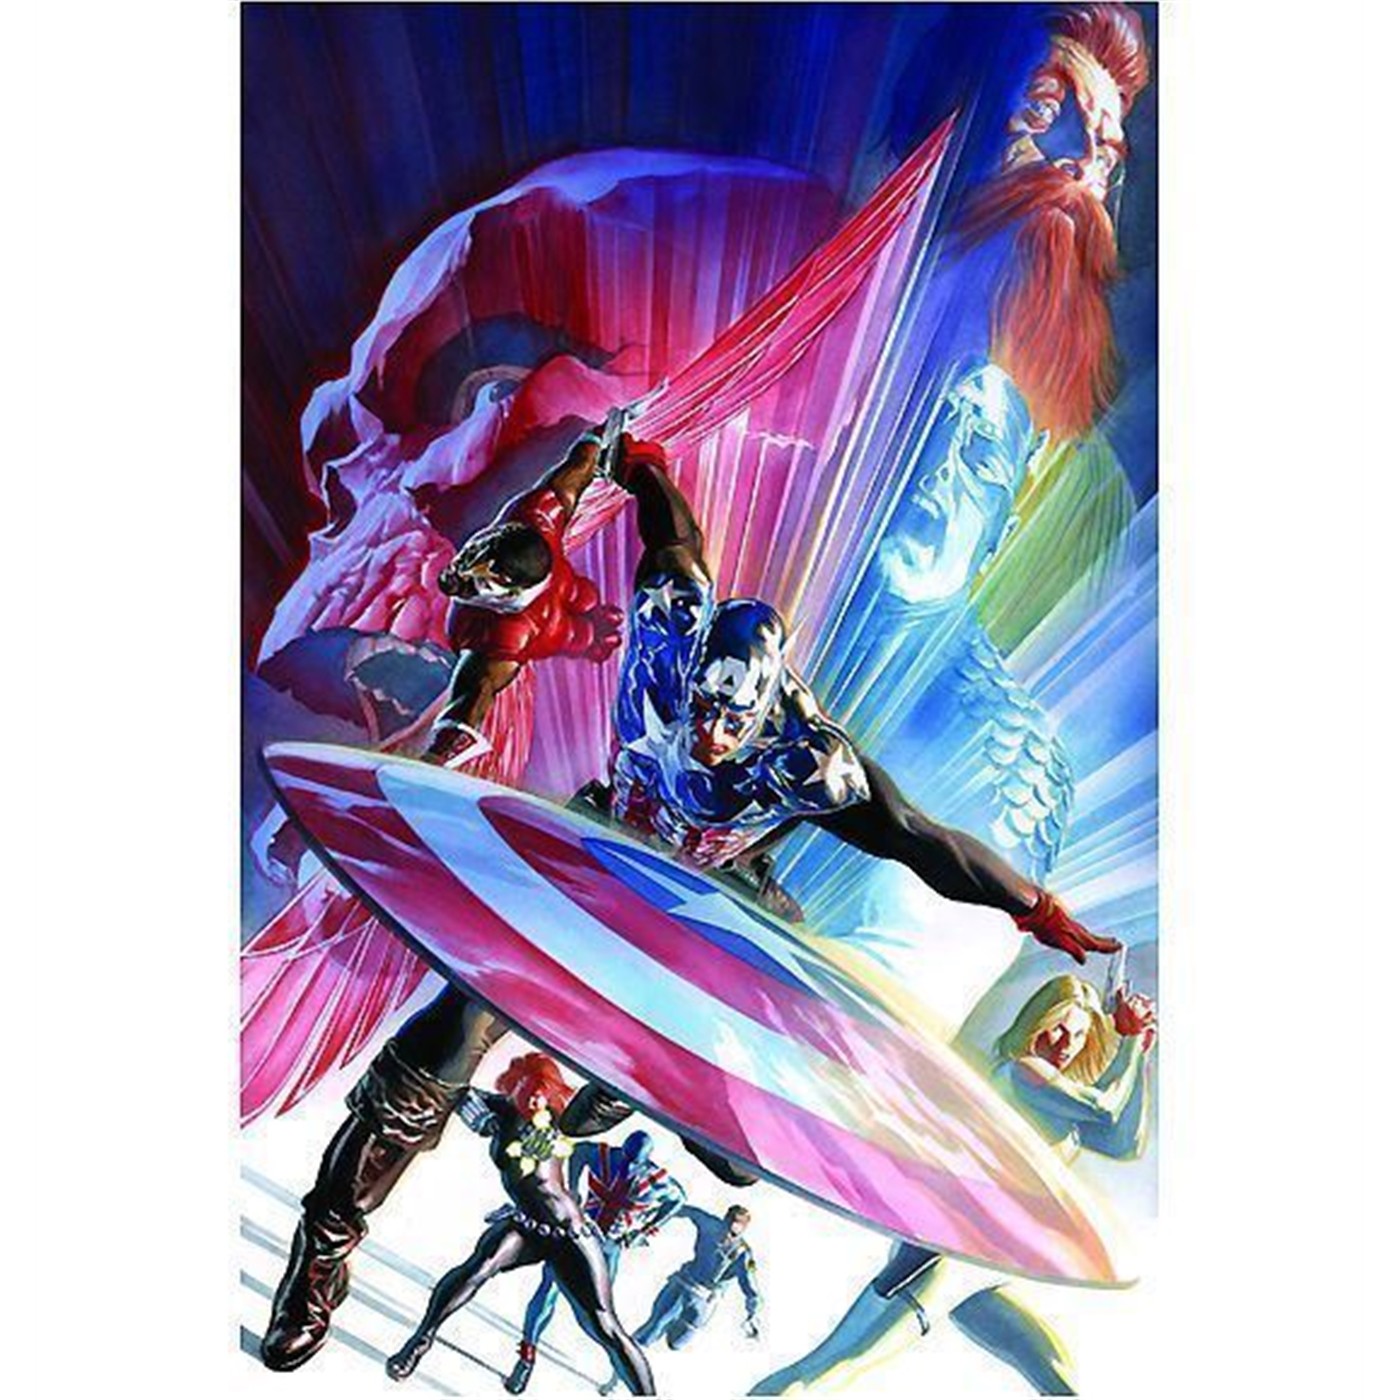 Captain America #600 Poster by Alex Ross